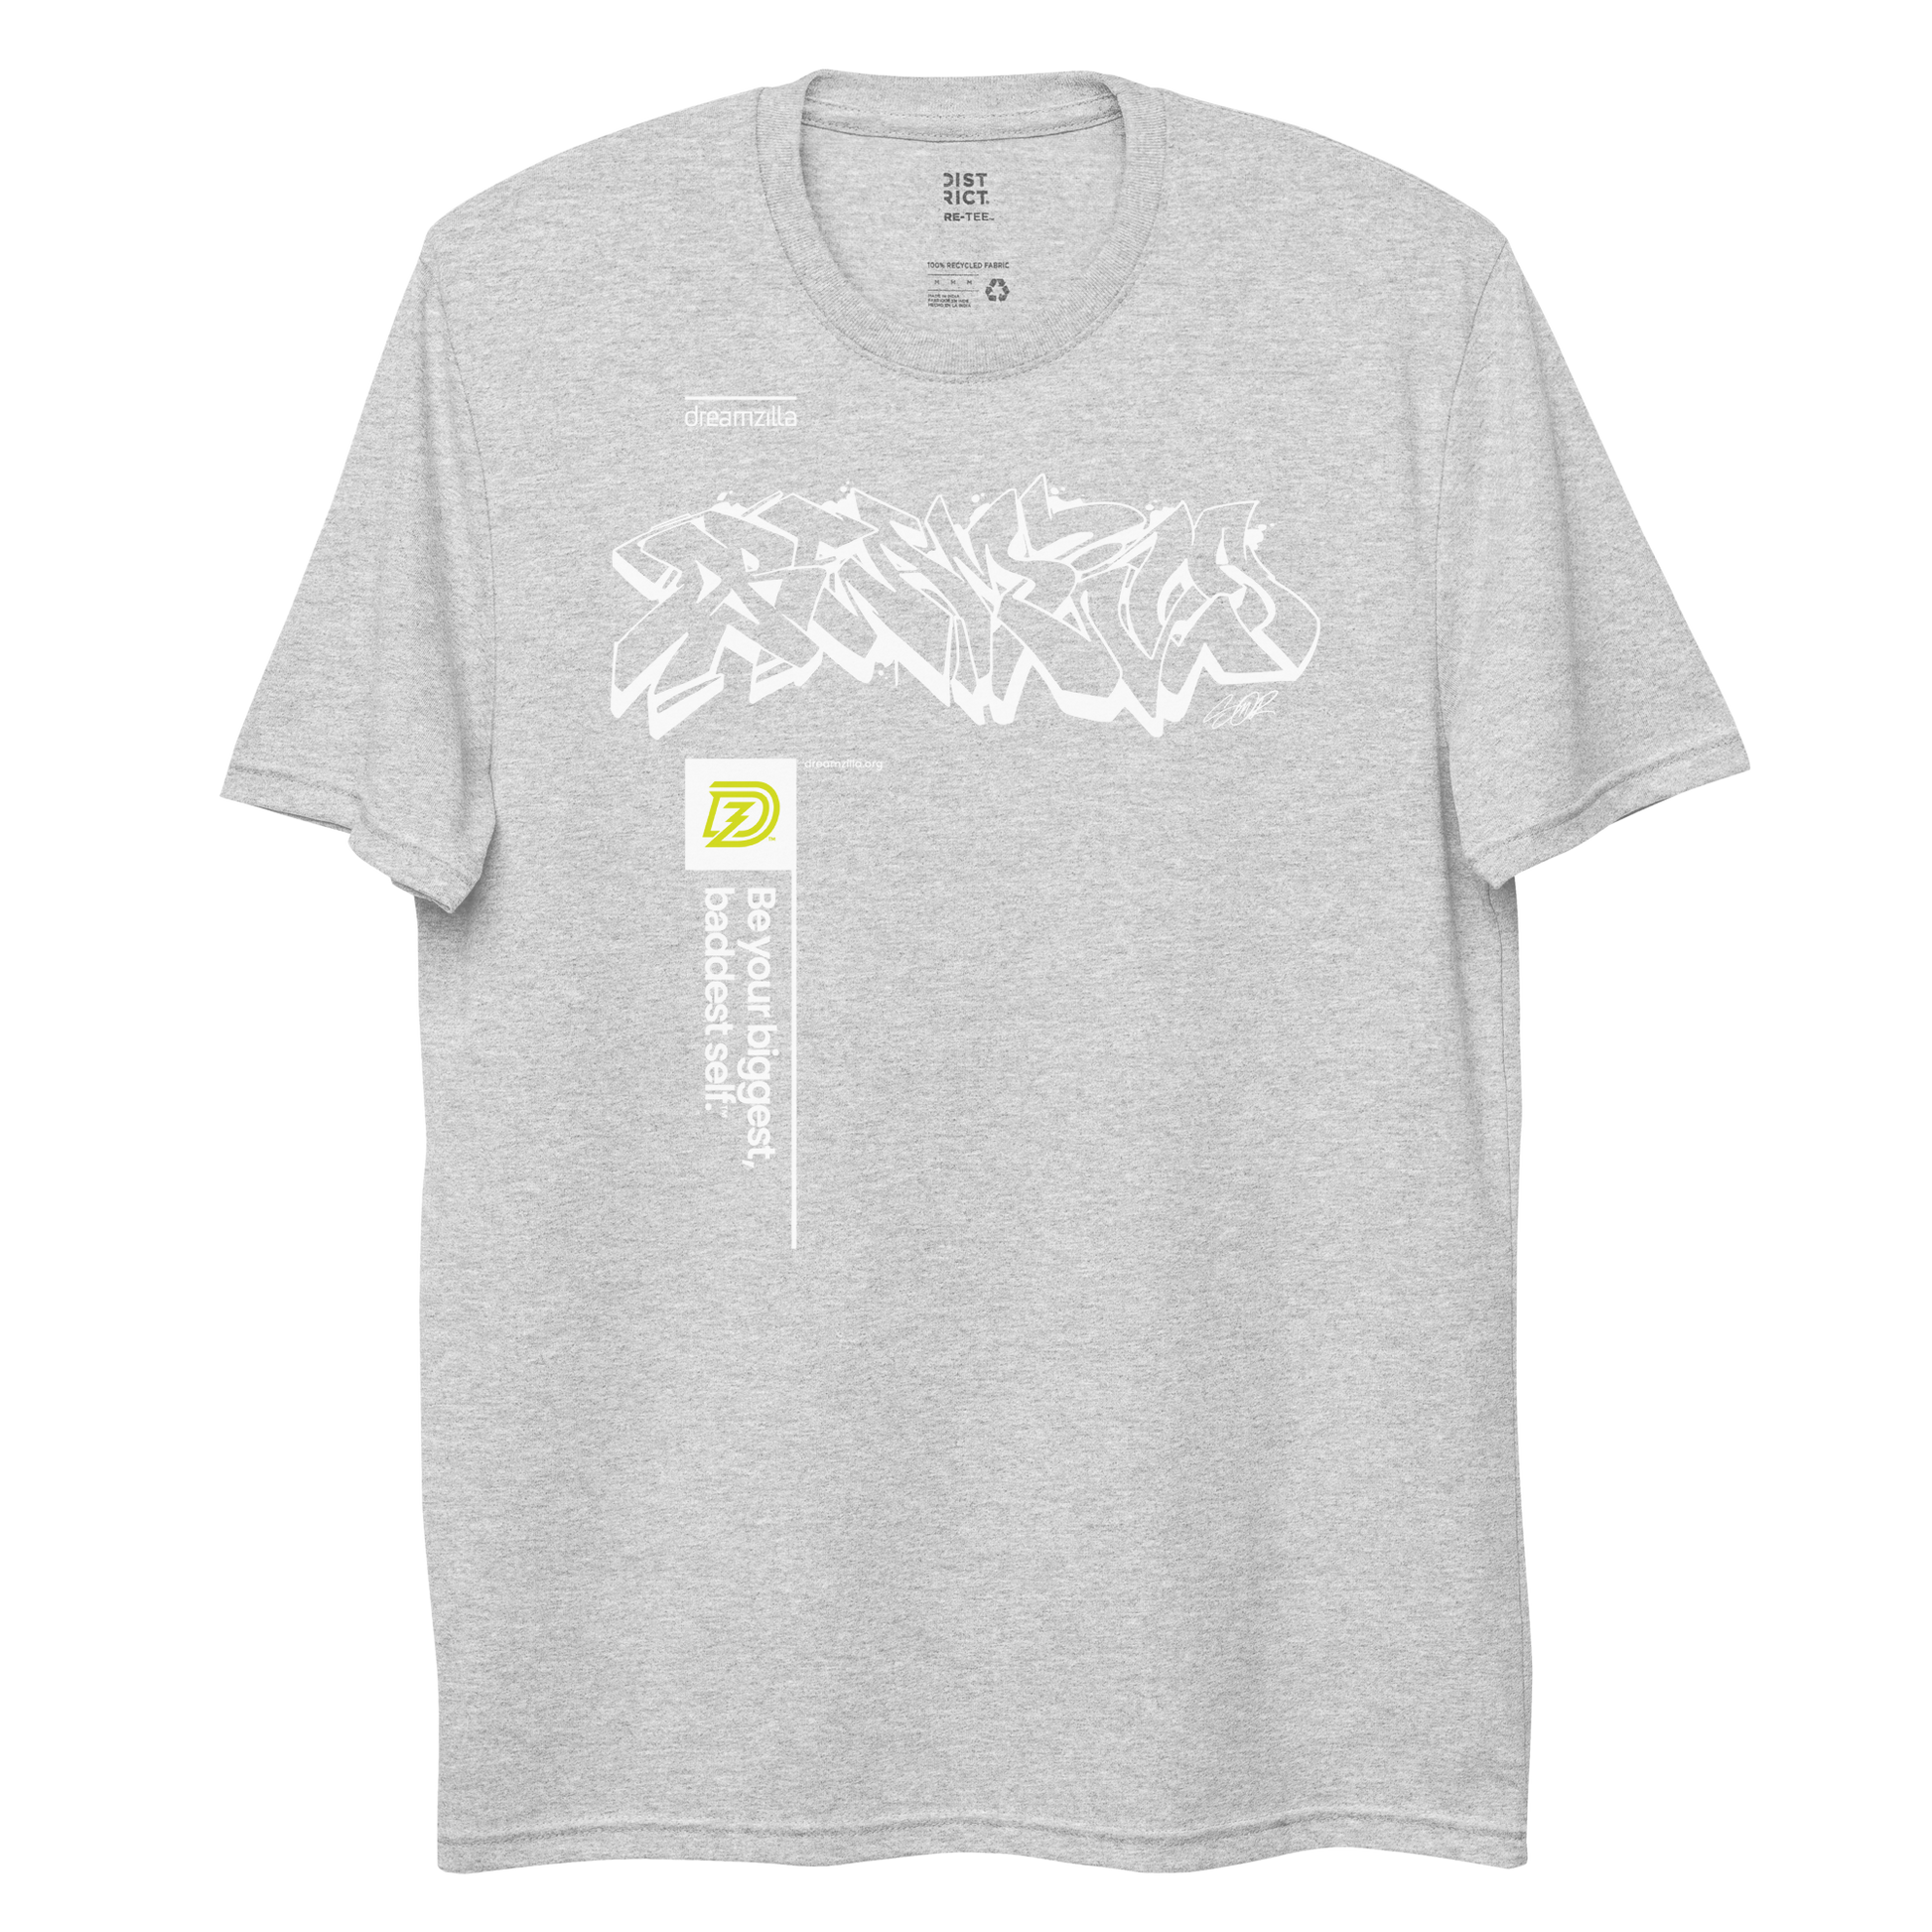 Graffiti Wildstyle by Sanitor ByBBS Unisex Recycled Short Sleeve Tee in Light Heather Grey